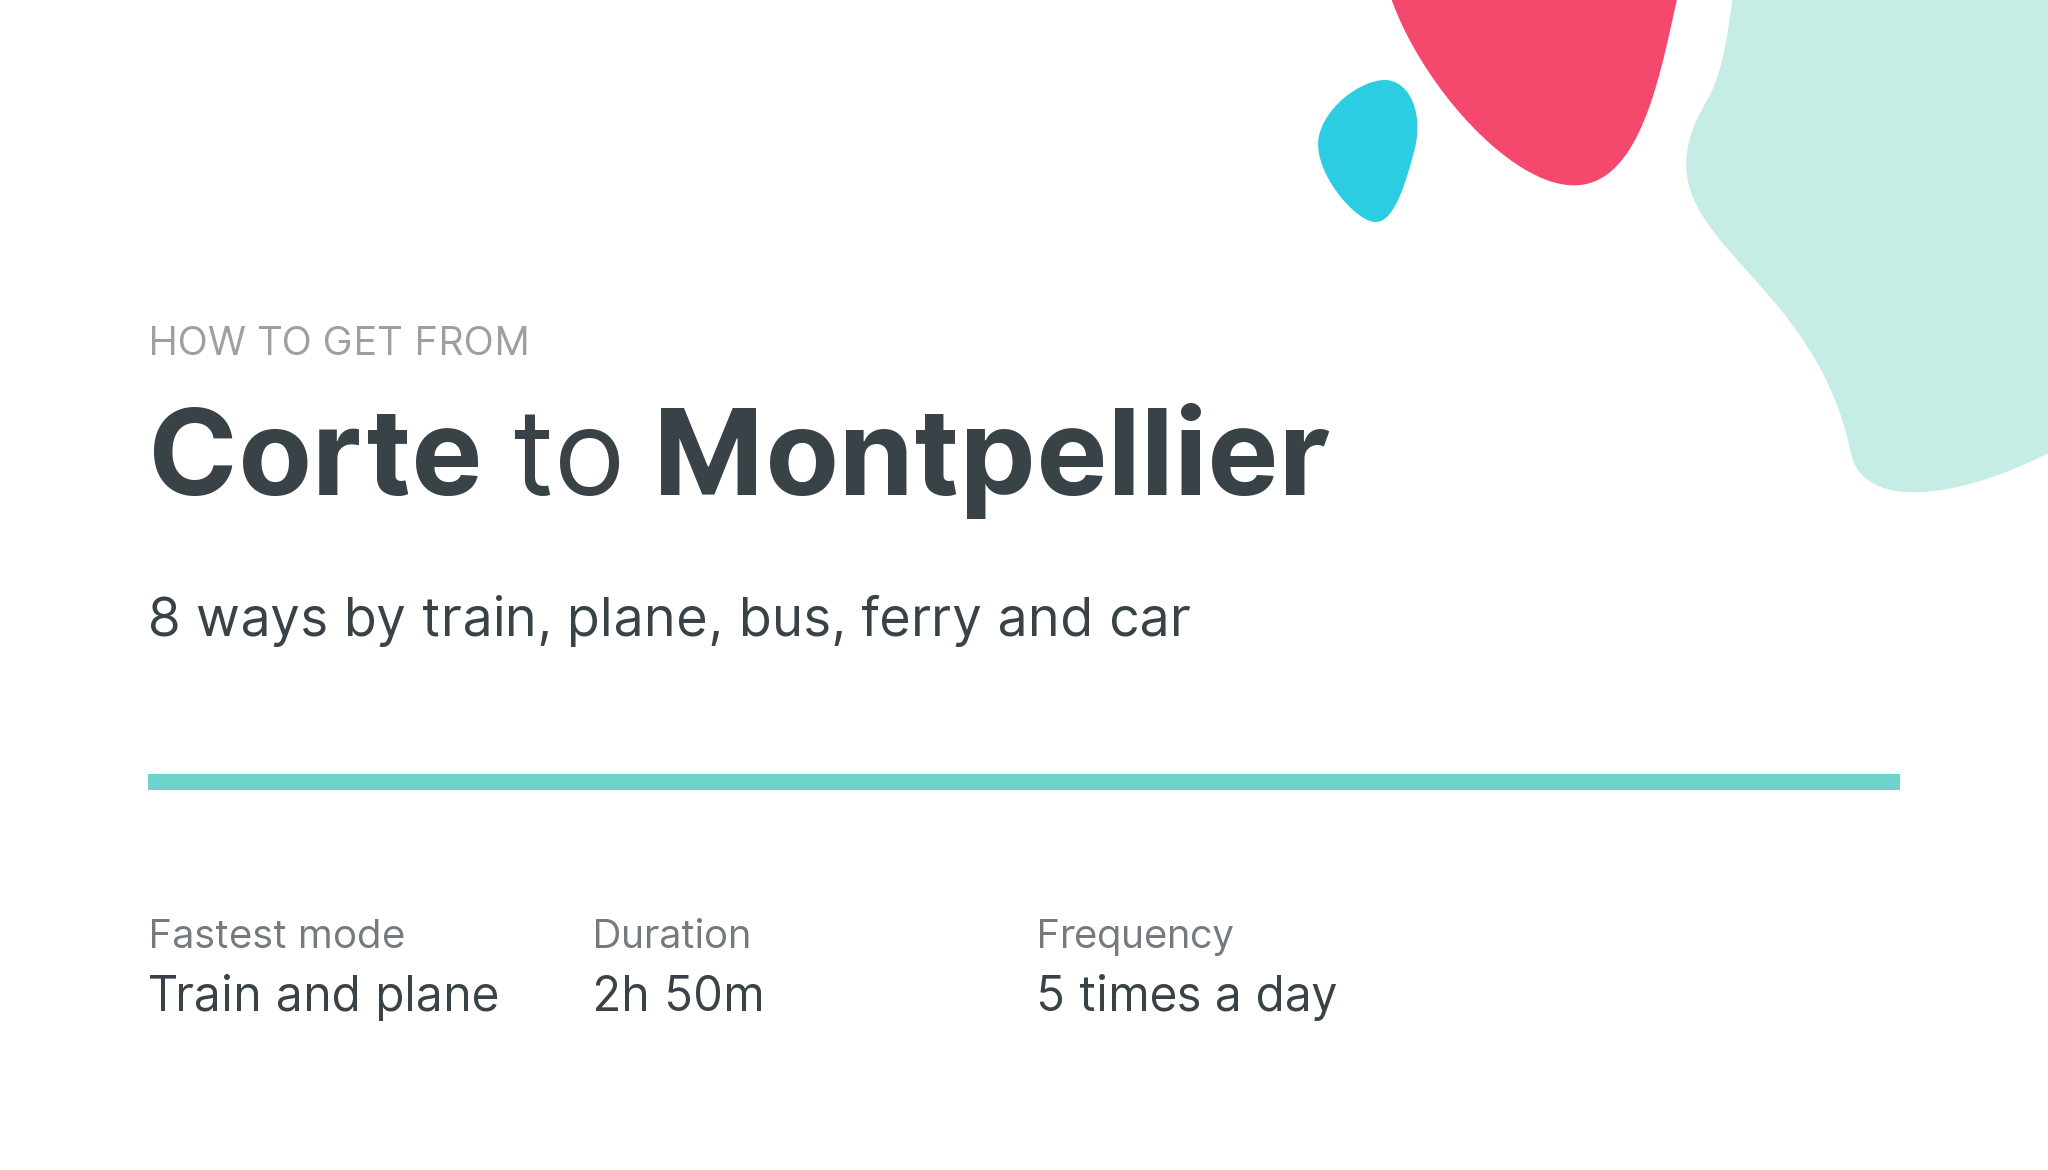 How do I get from Corte to Montpellier